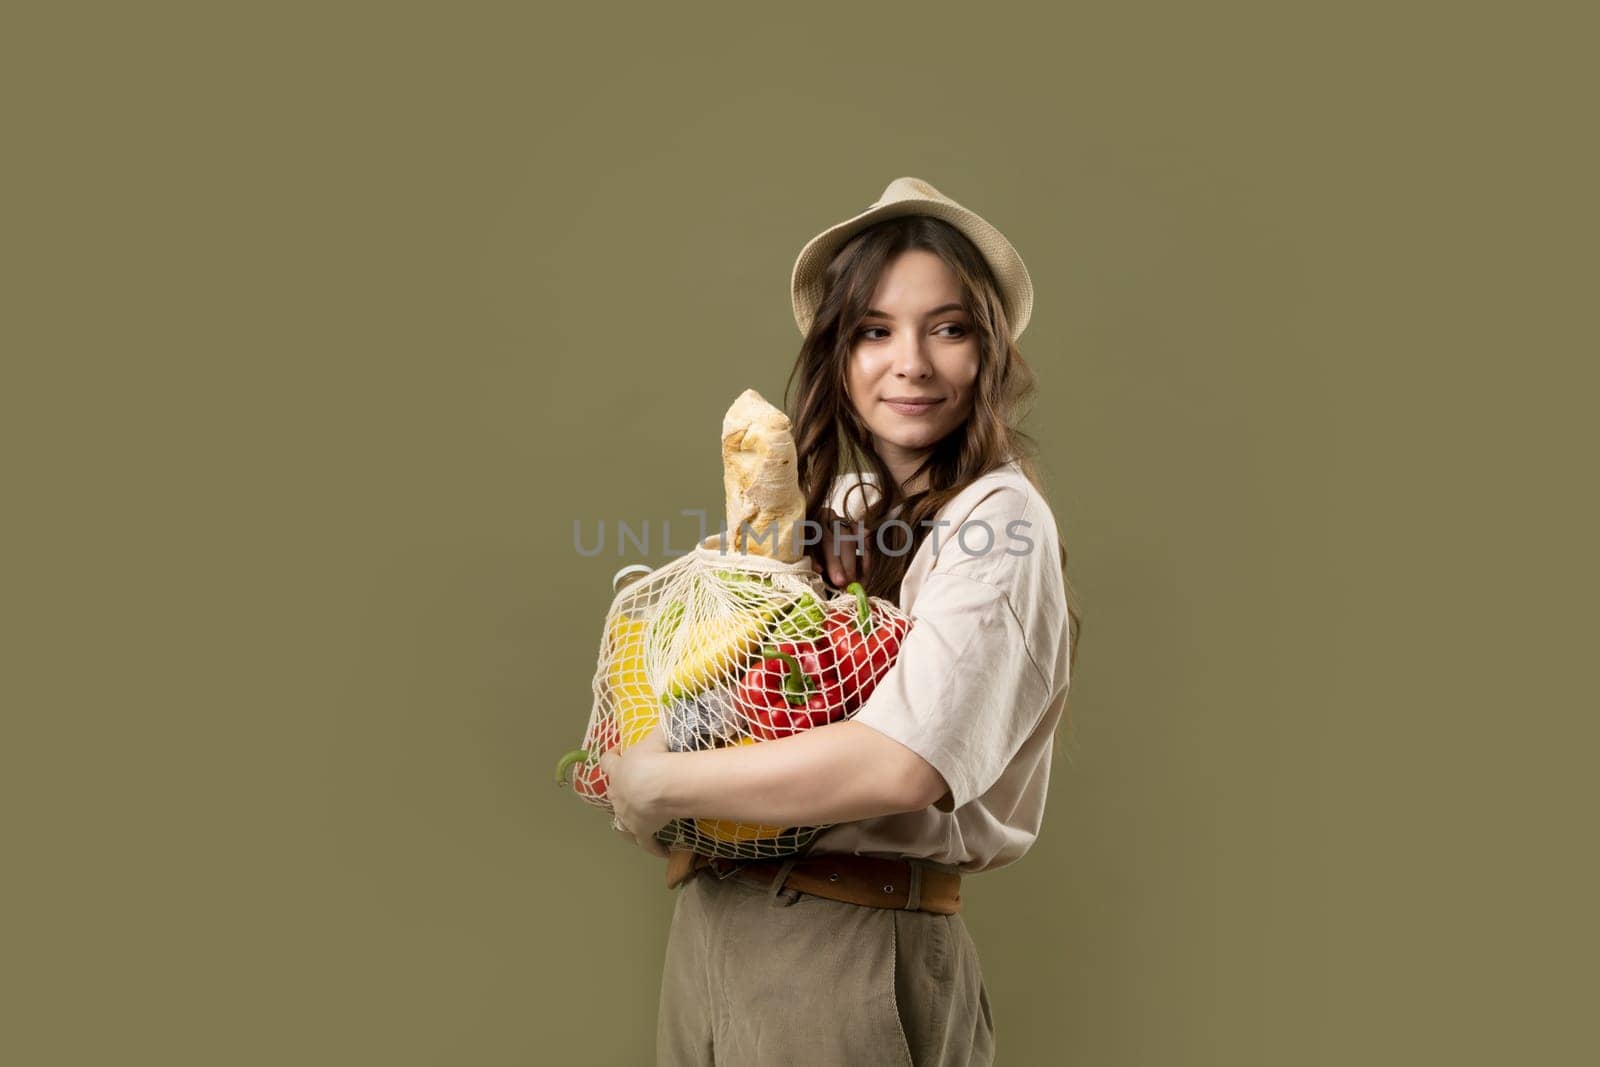 Zero waste concept. Woman holding reusable cotton shopping mesh bag with groceries from a market. Concept of no plastic. Zero waste, plastic free. Eco friendly concept. Sustainable lifestyle